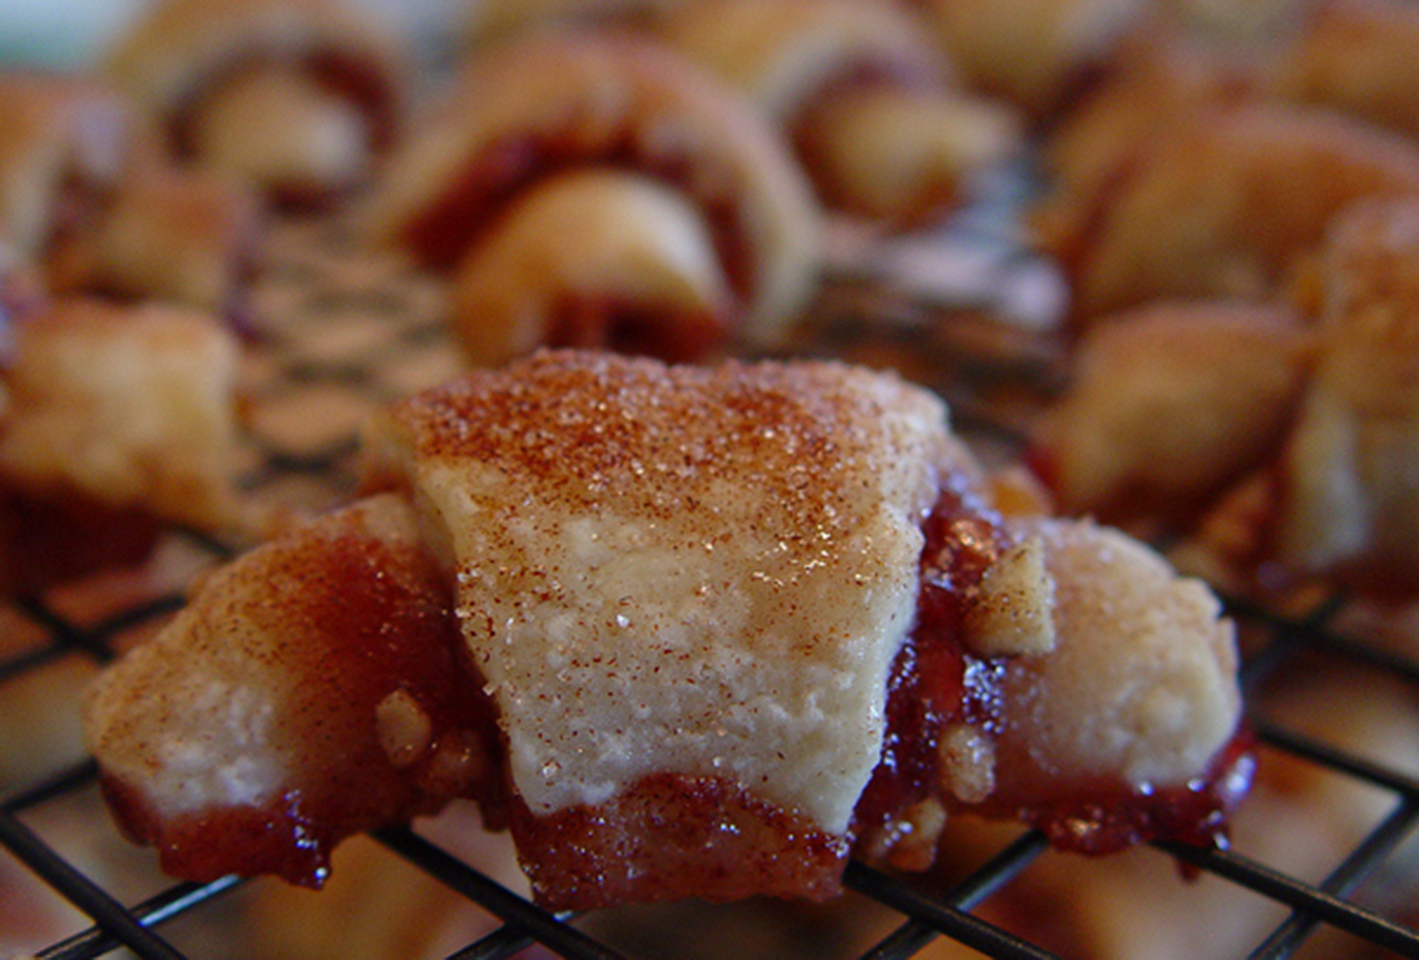 Raspberry and Apricot Rugelach